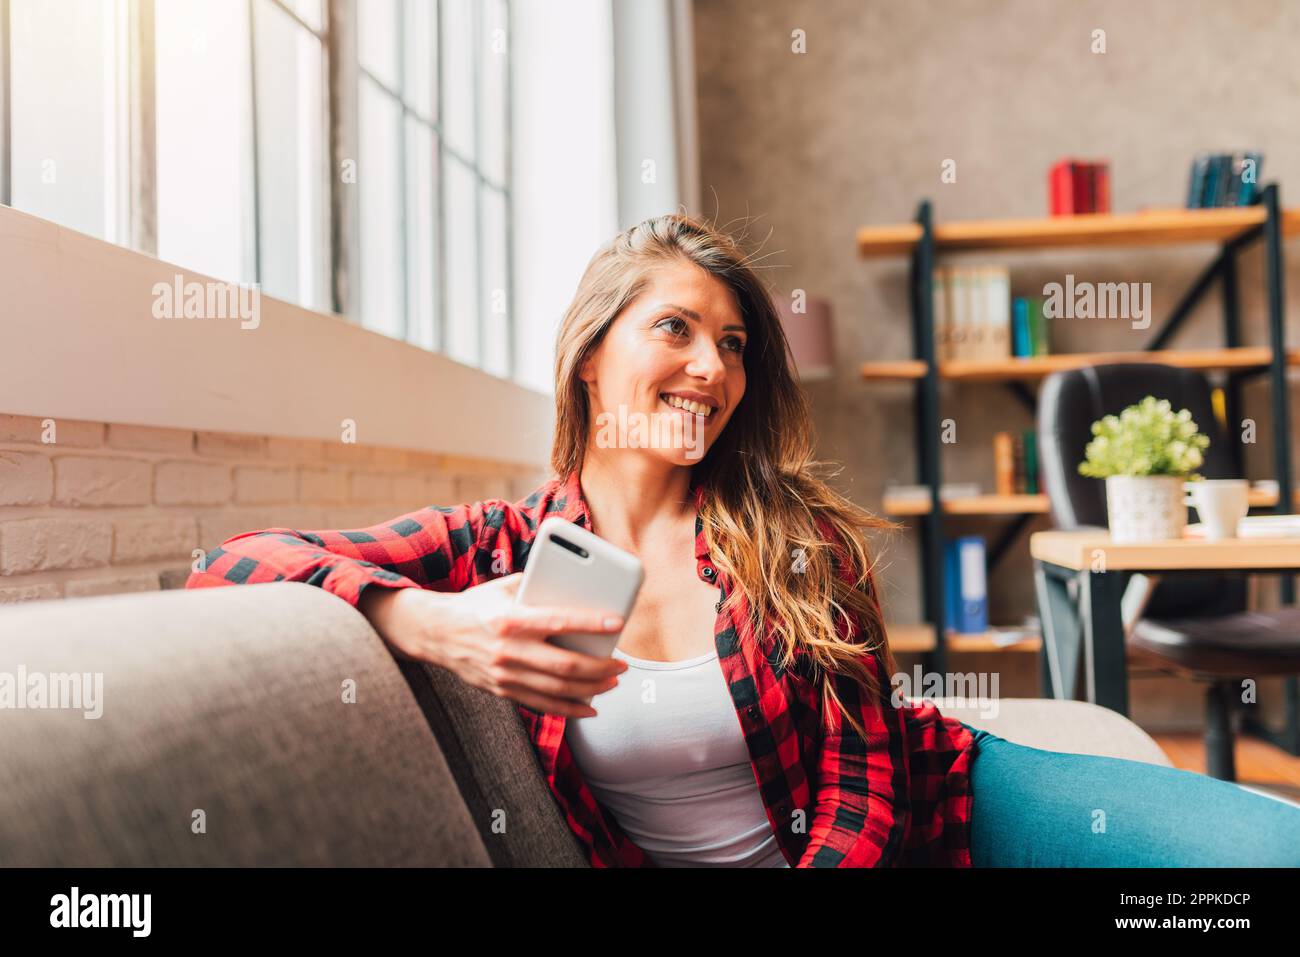 Woman relax at home in her free time with mobile phone Stock Photo